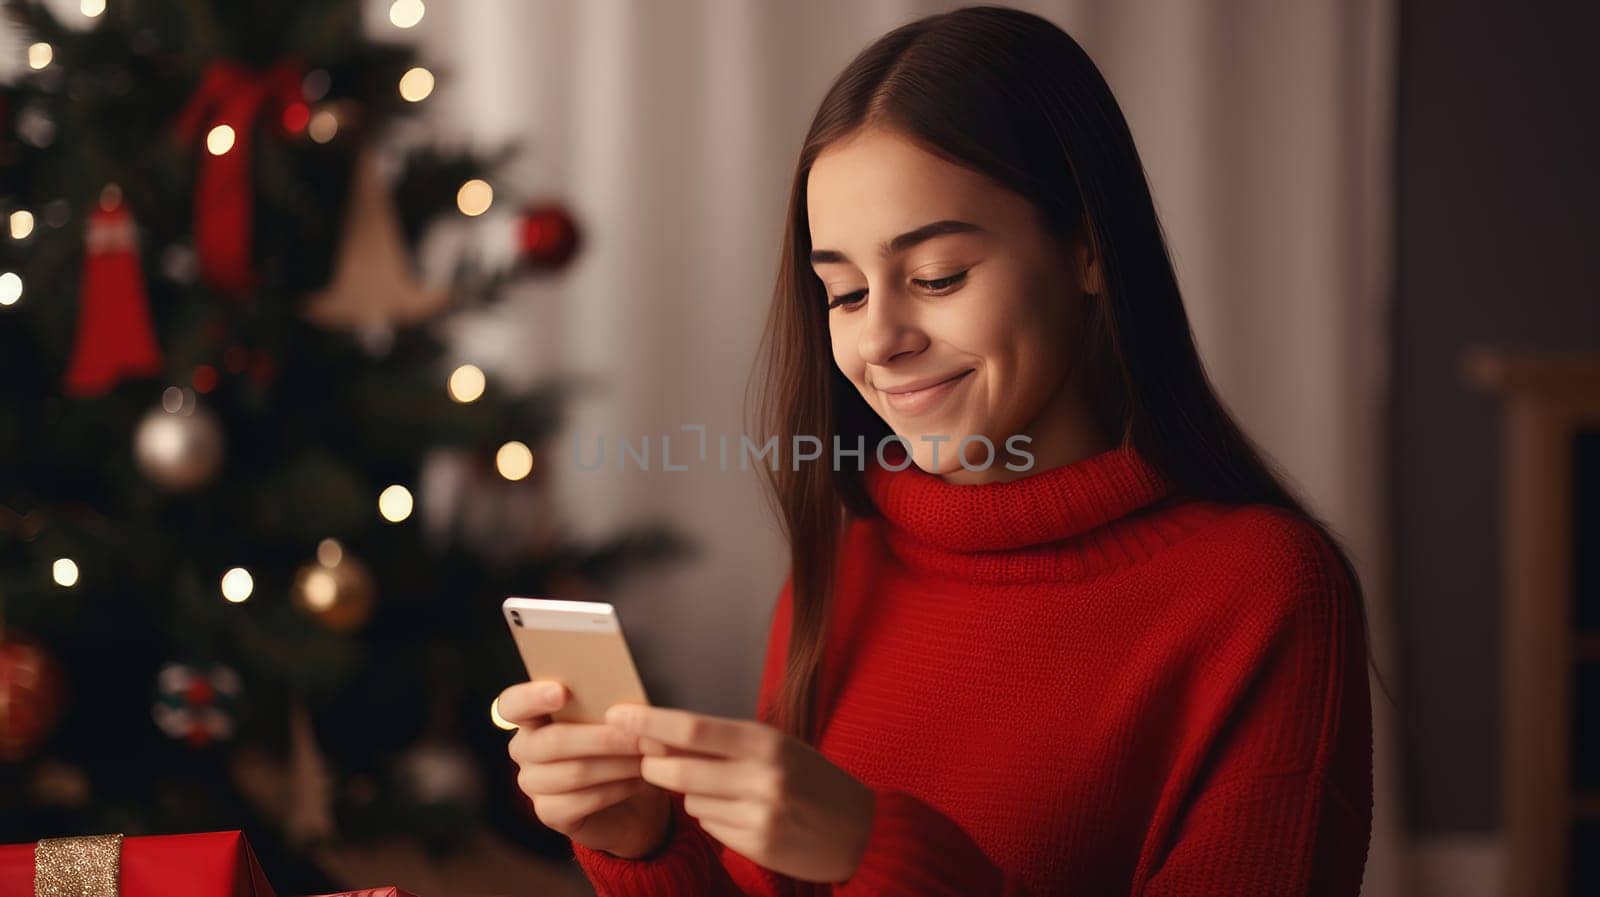 Young woman orders New Year gifts during Christmas holidays at home using smartphone and credit card by Alla_Yurtayeva